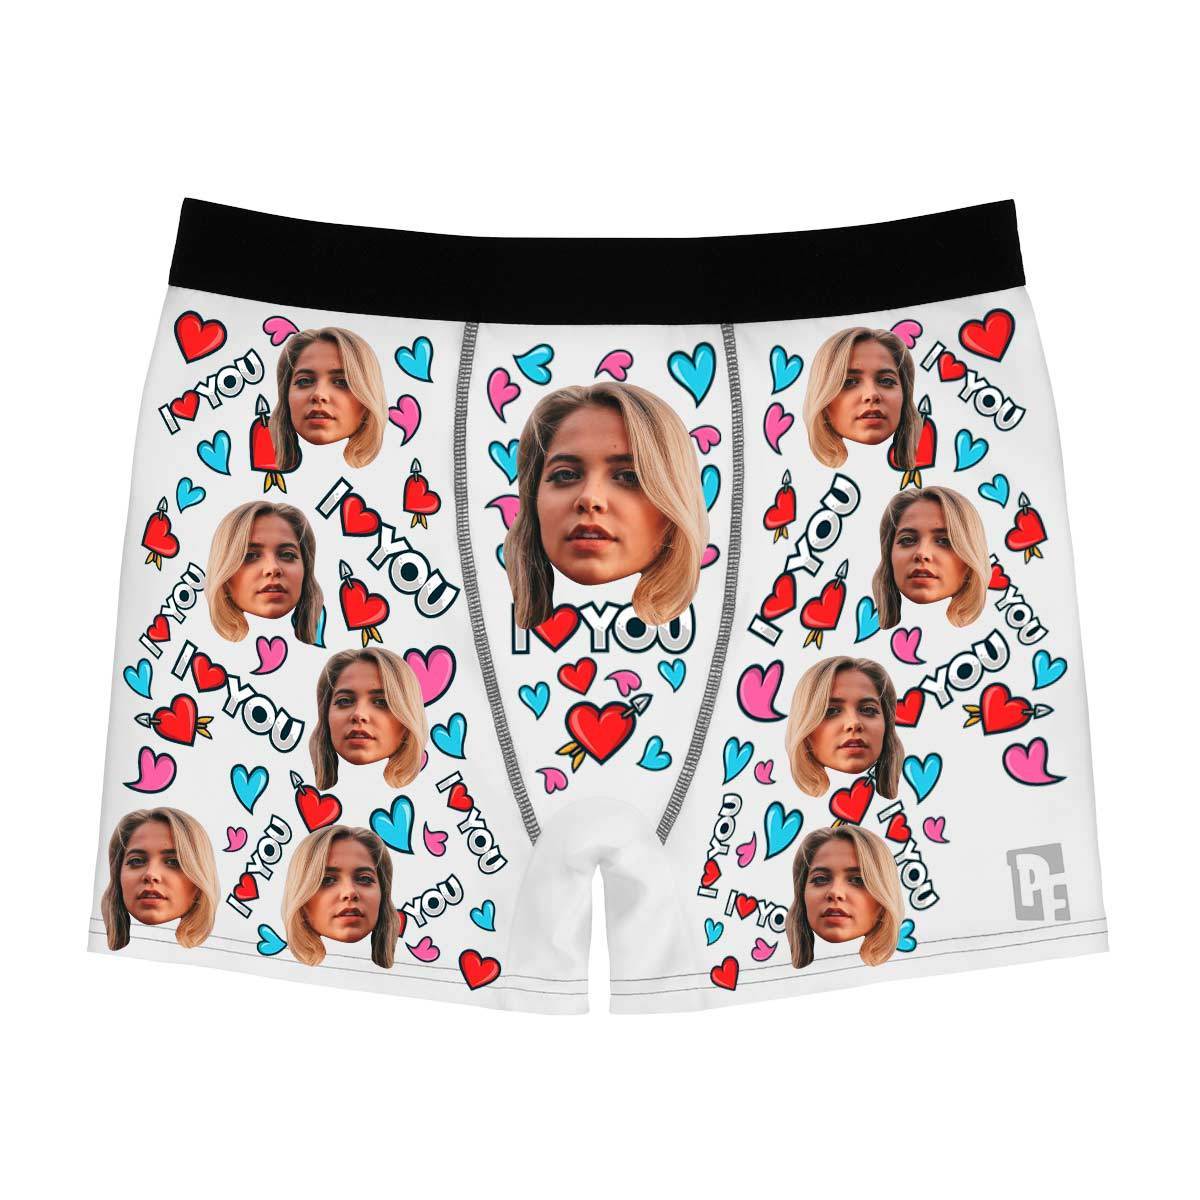 Red Love you men's boxer briefs personalized with photo printed on them